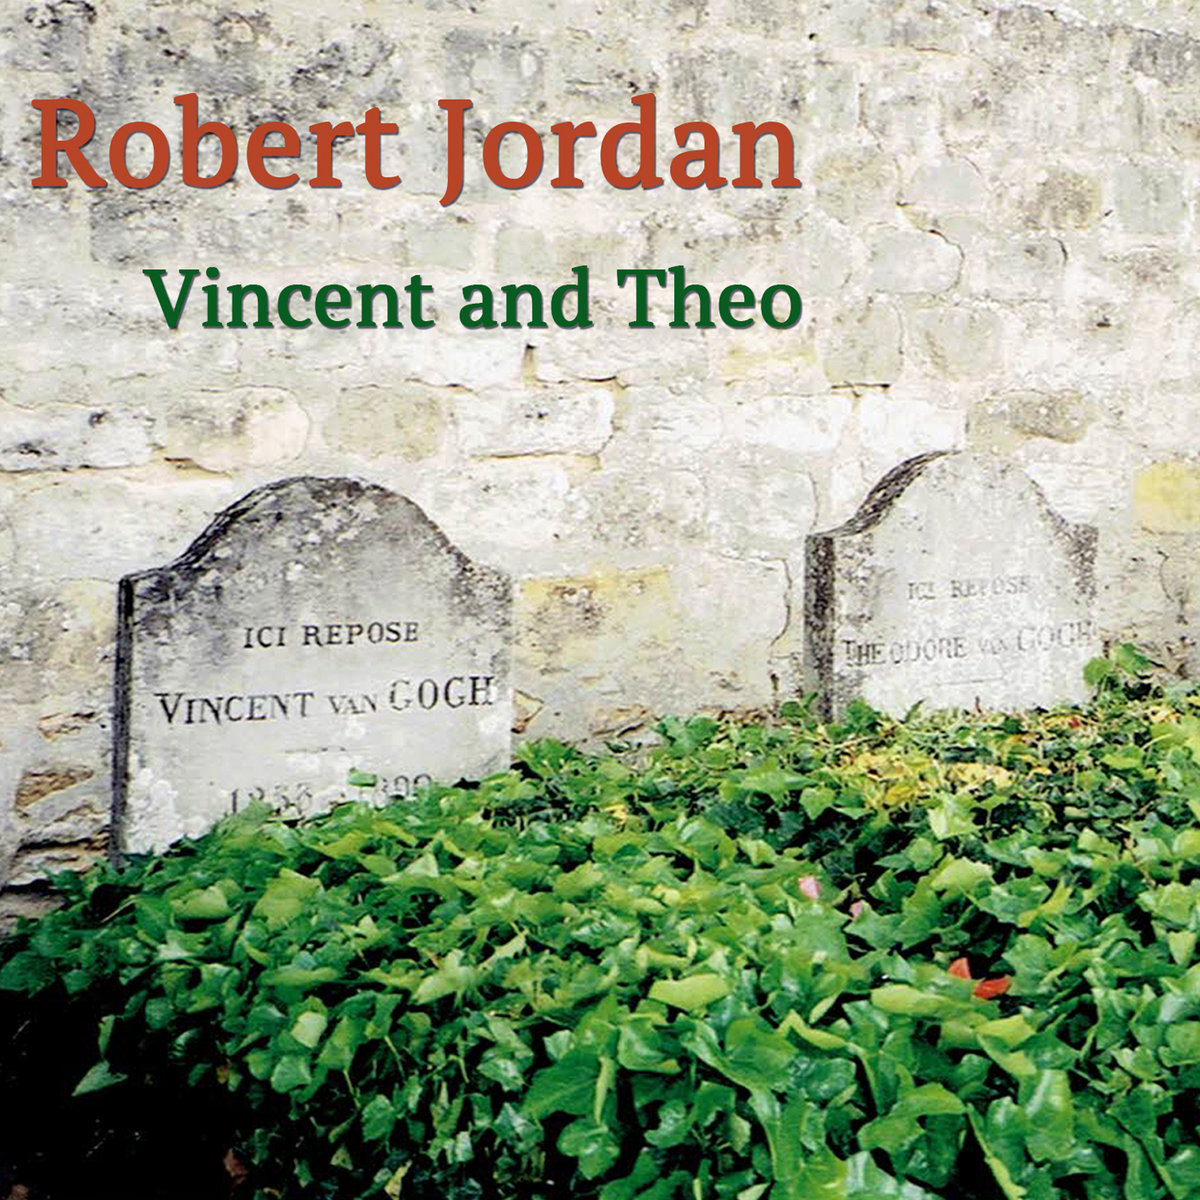 Listen to the single 'Song for Bob' and check out some great new music from Robert Jordan. #indiedockmusicblog #folkrock eu1.hubs.ly/H098ZXx0